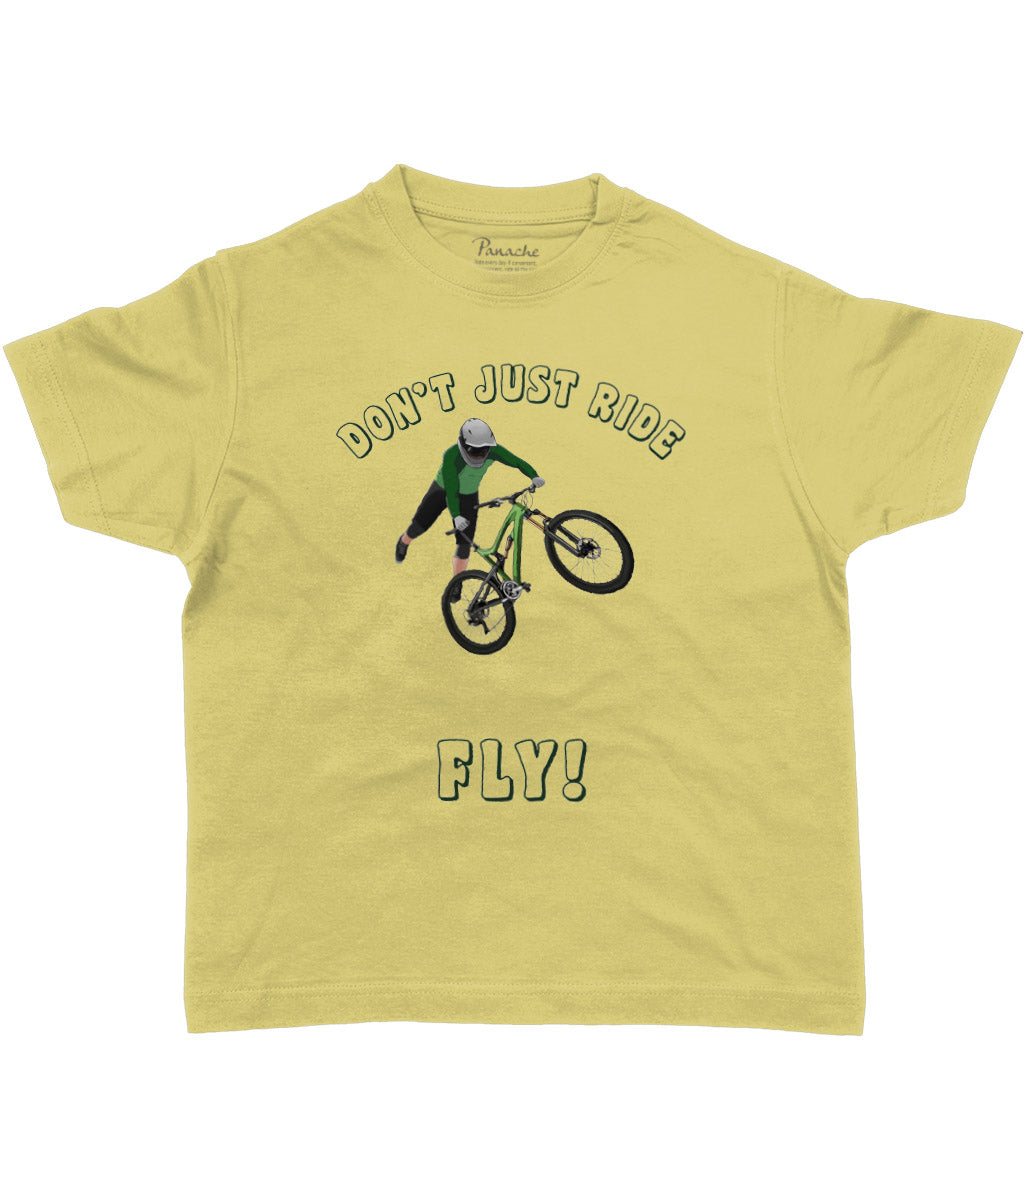 Don’t Just Ride… Fly Kids Cycling T-shirt Dark Yellow